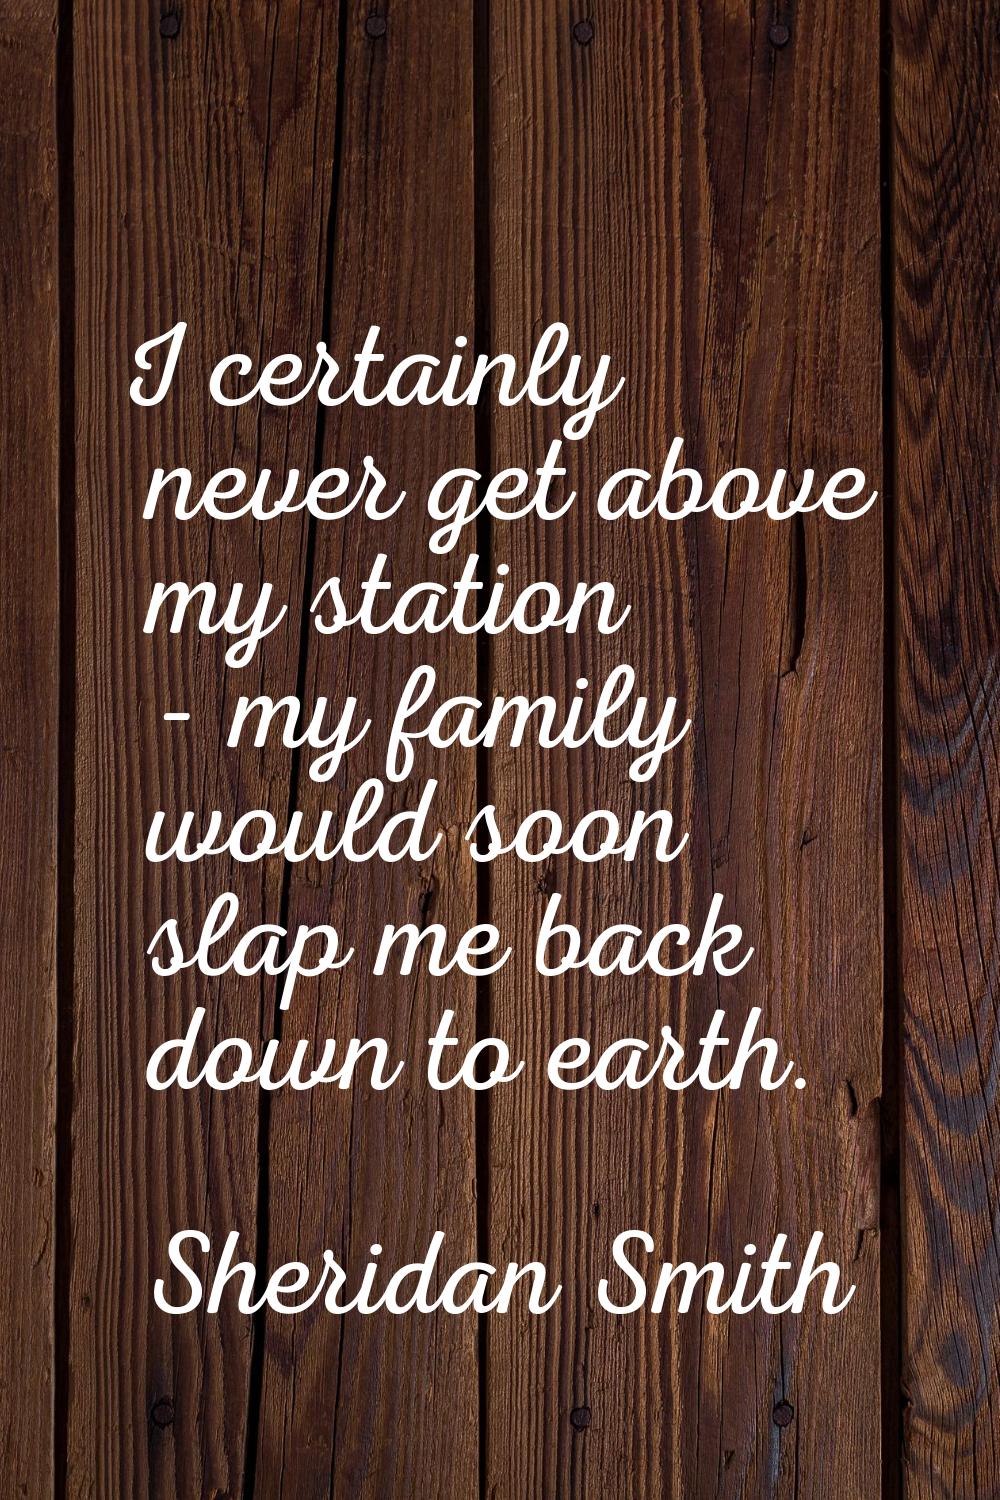 I certainly never get above my station - my family would soon slap me back down to earth.